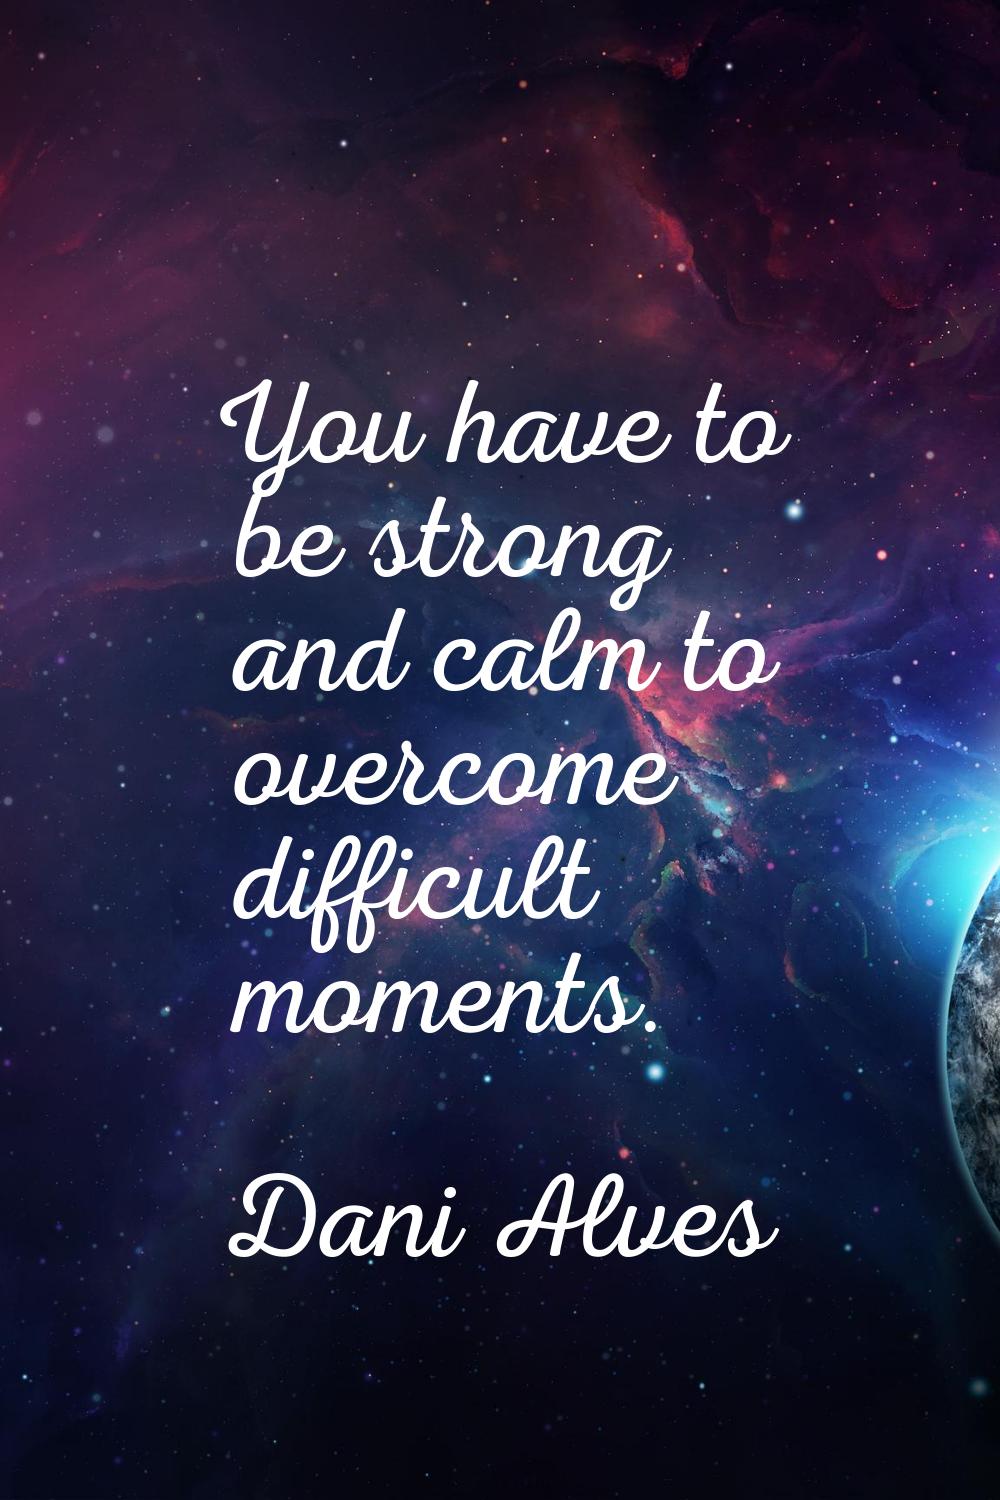 You have to be strong and calm to overcome difficult moments.